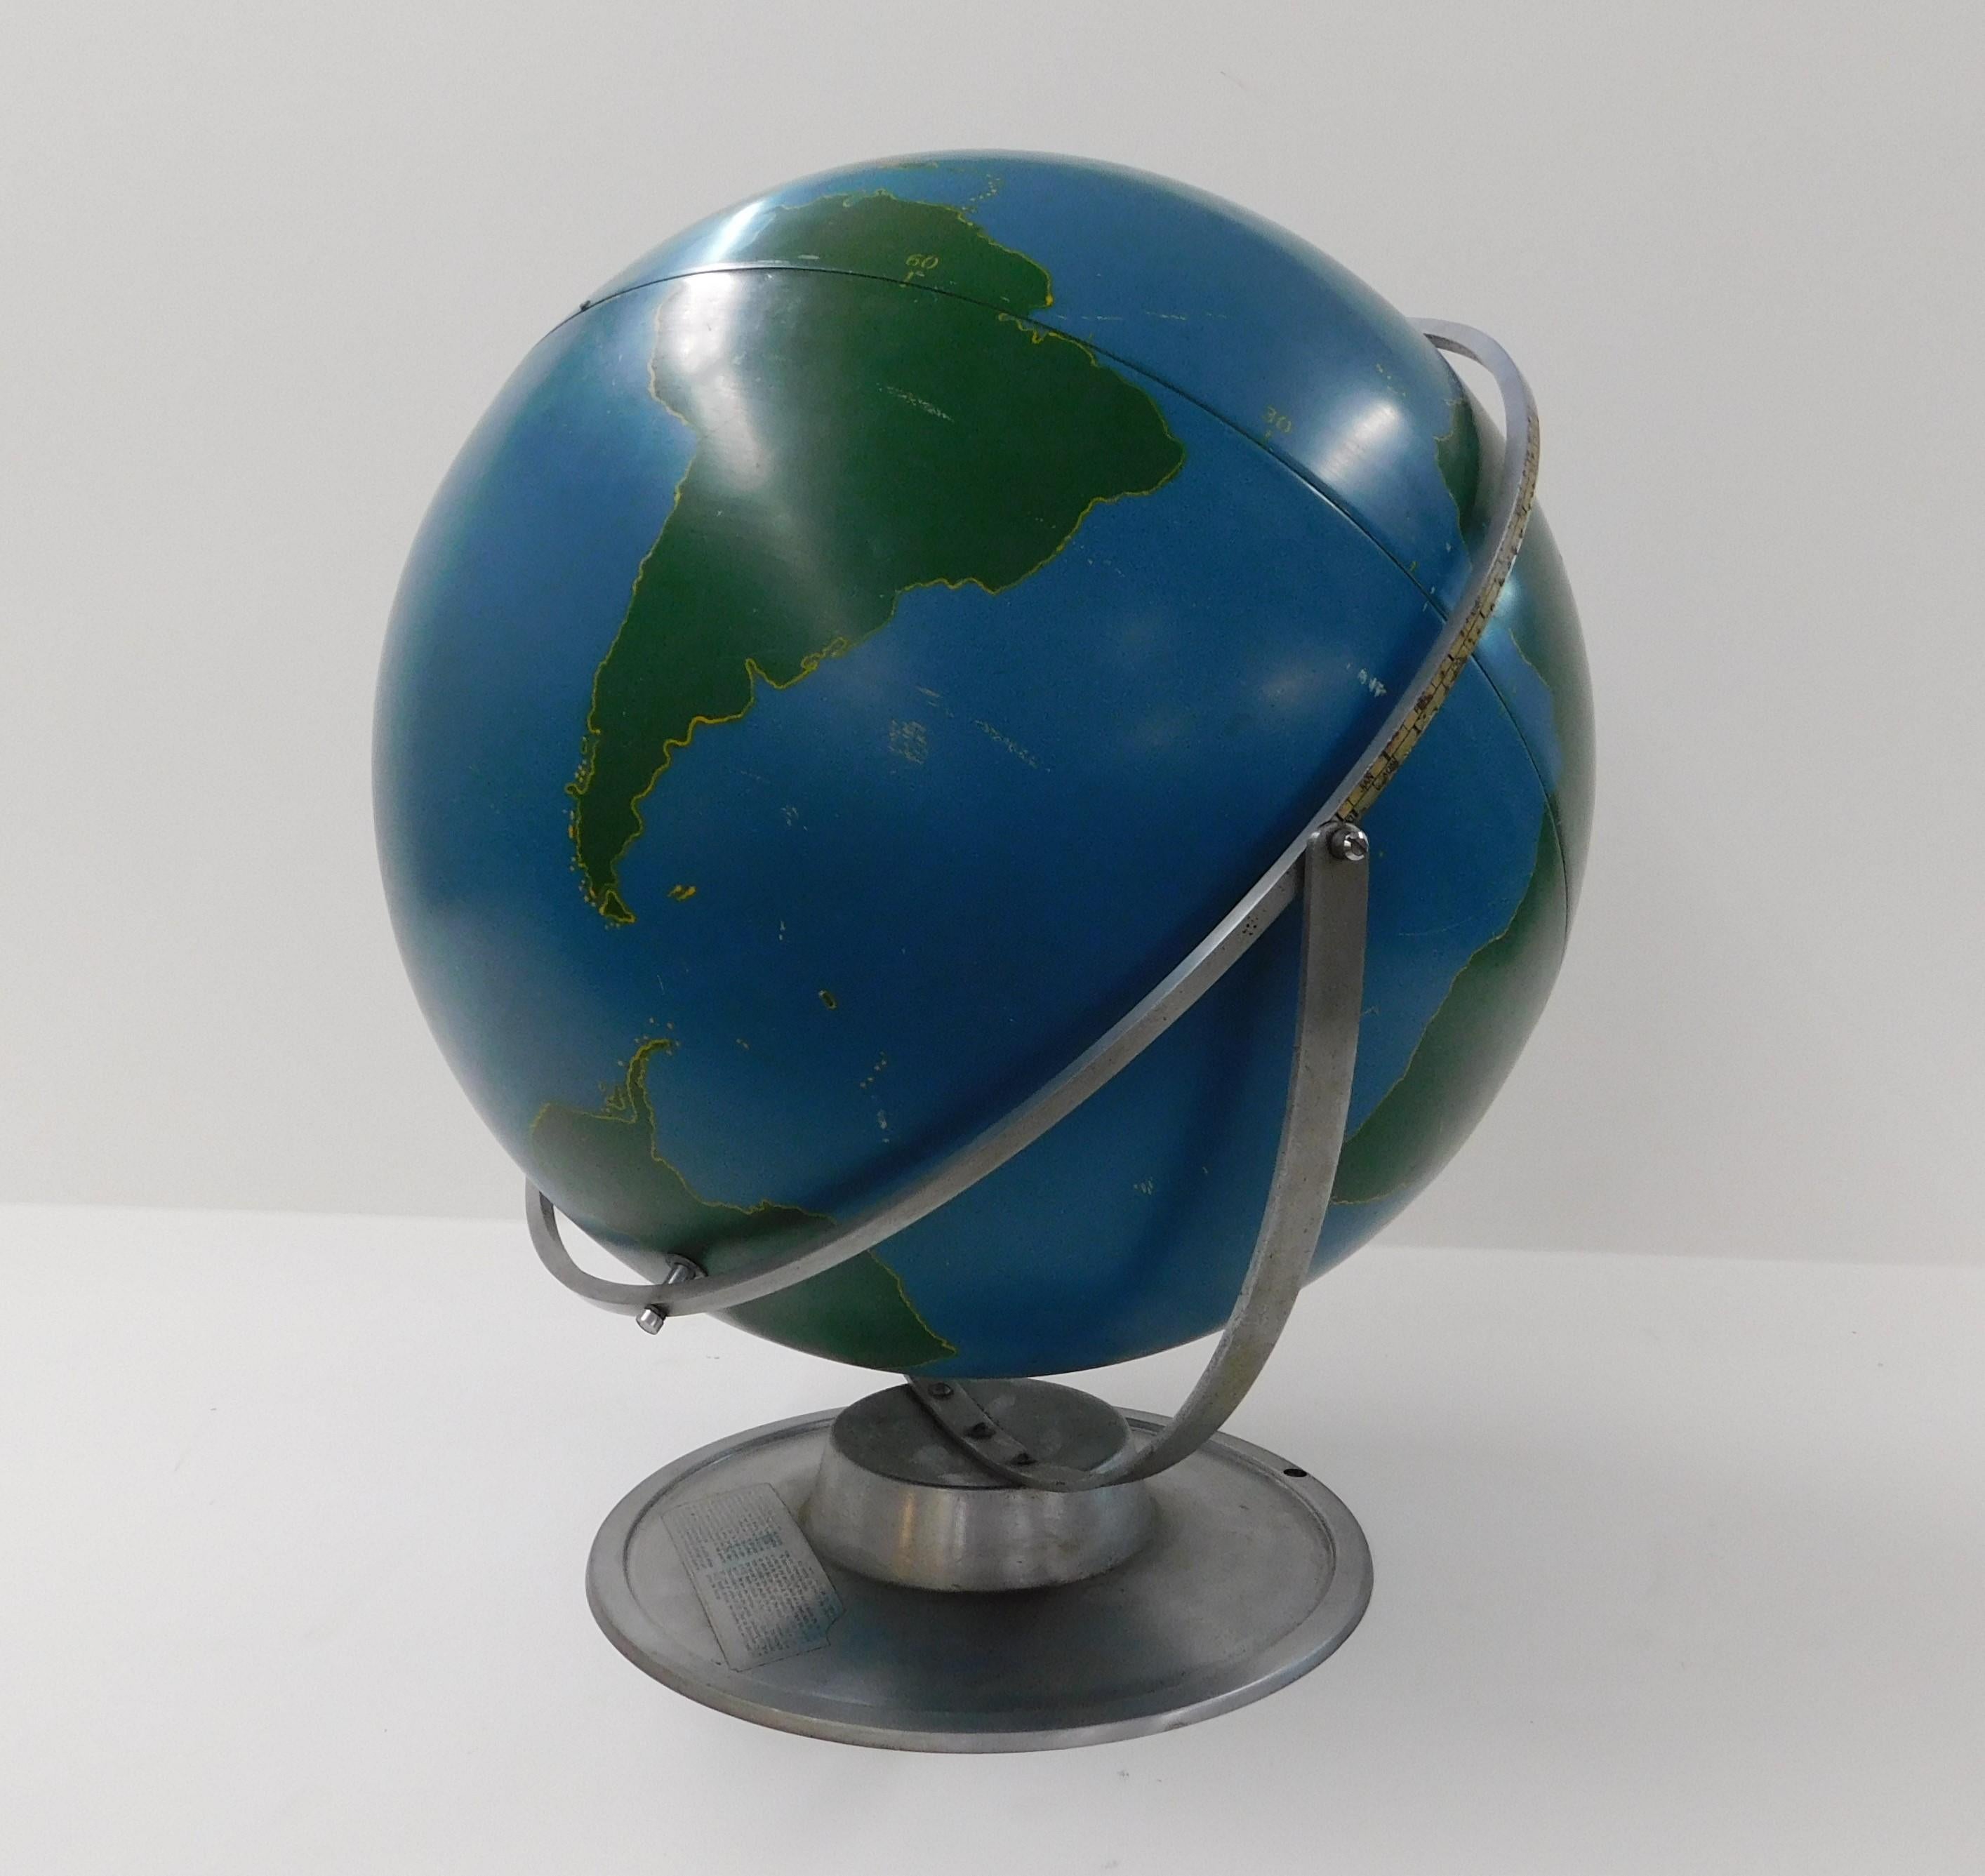 Large lacquer over aluminum rotating and swivel aviation military training globe on an aluminum base, strong steel construction circa 1940 manufactured in Chicago Illinois. These were designed to be written on with chalk to depict and train for